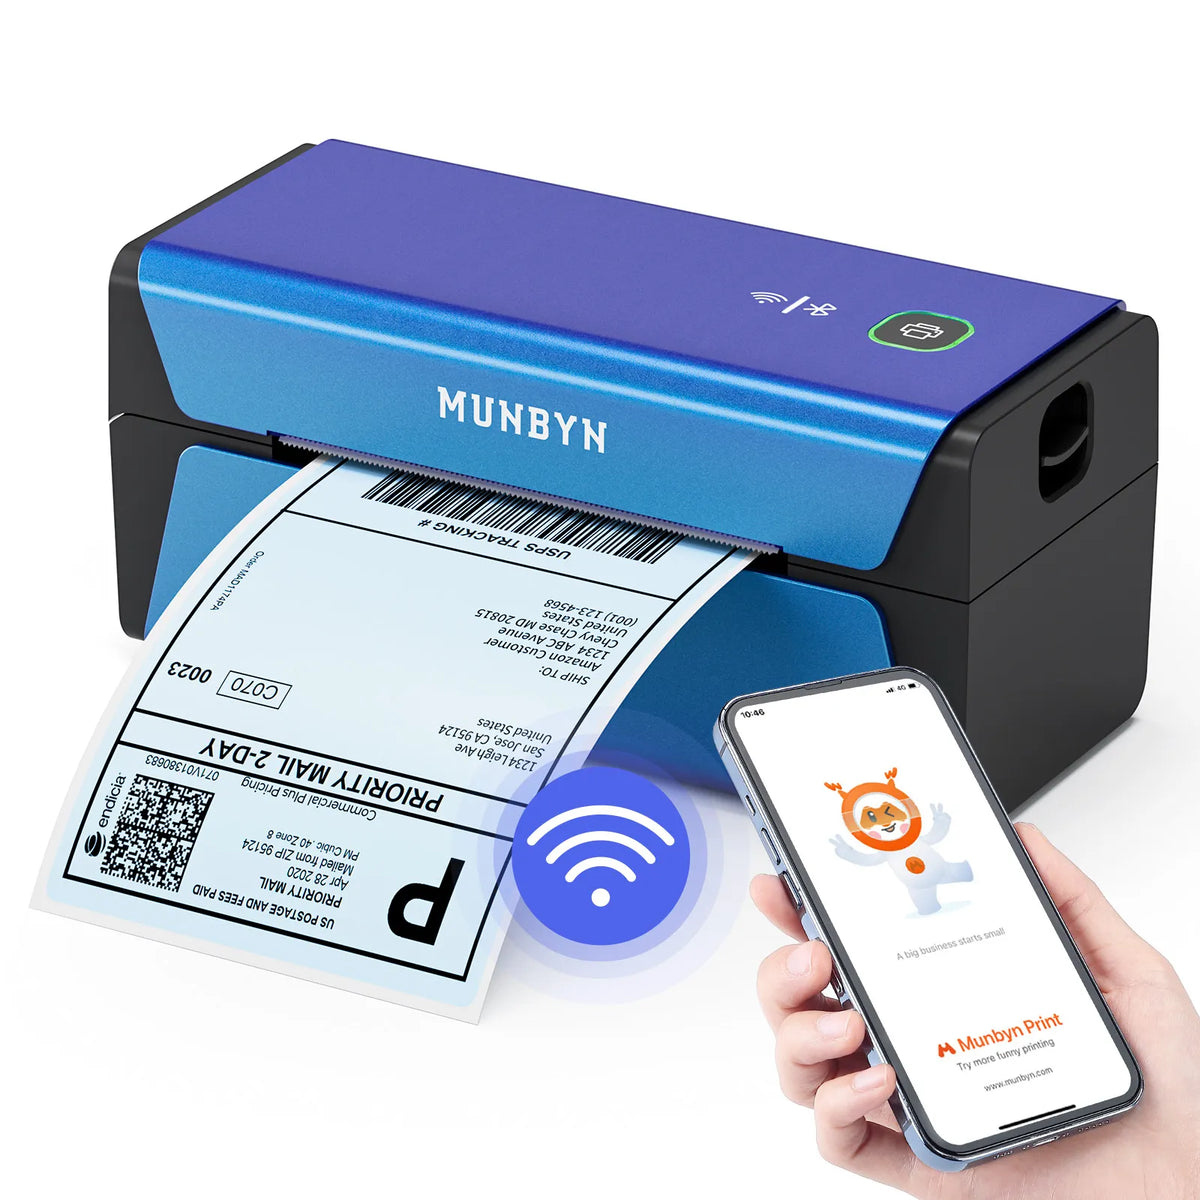 MUNBYN Voice Controlled Wireless Thermal Label Printer P44S